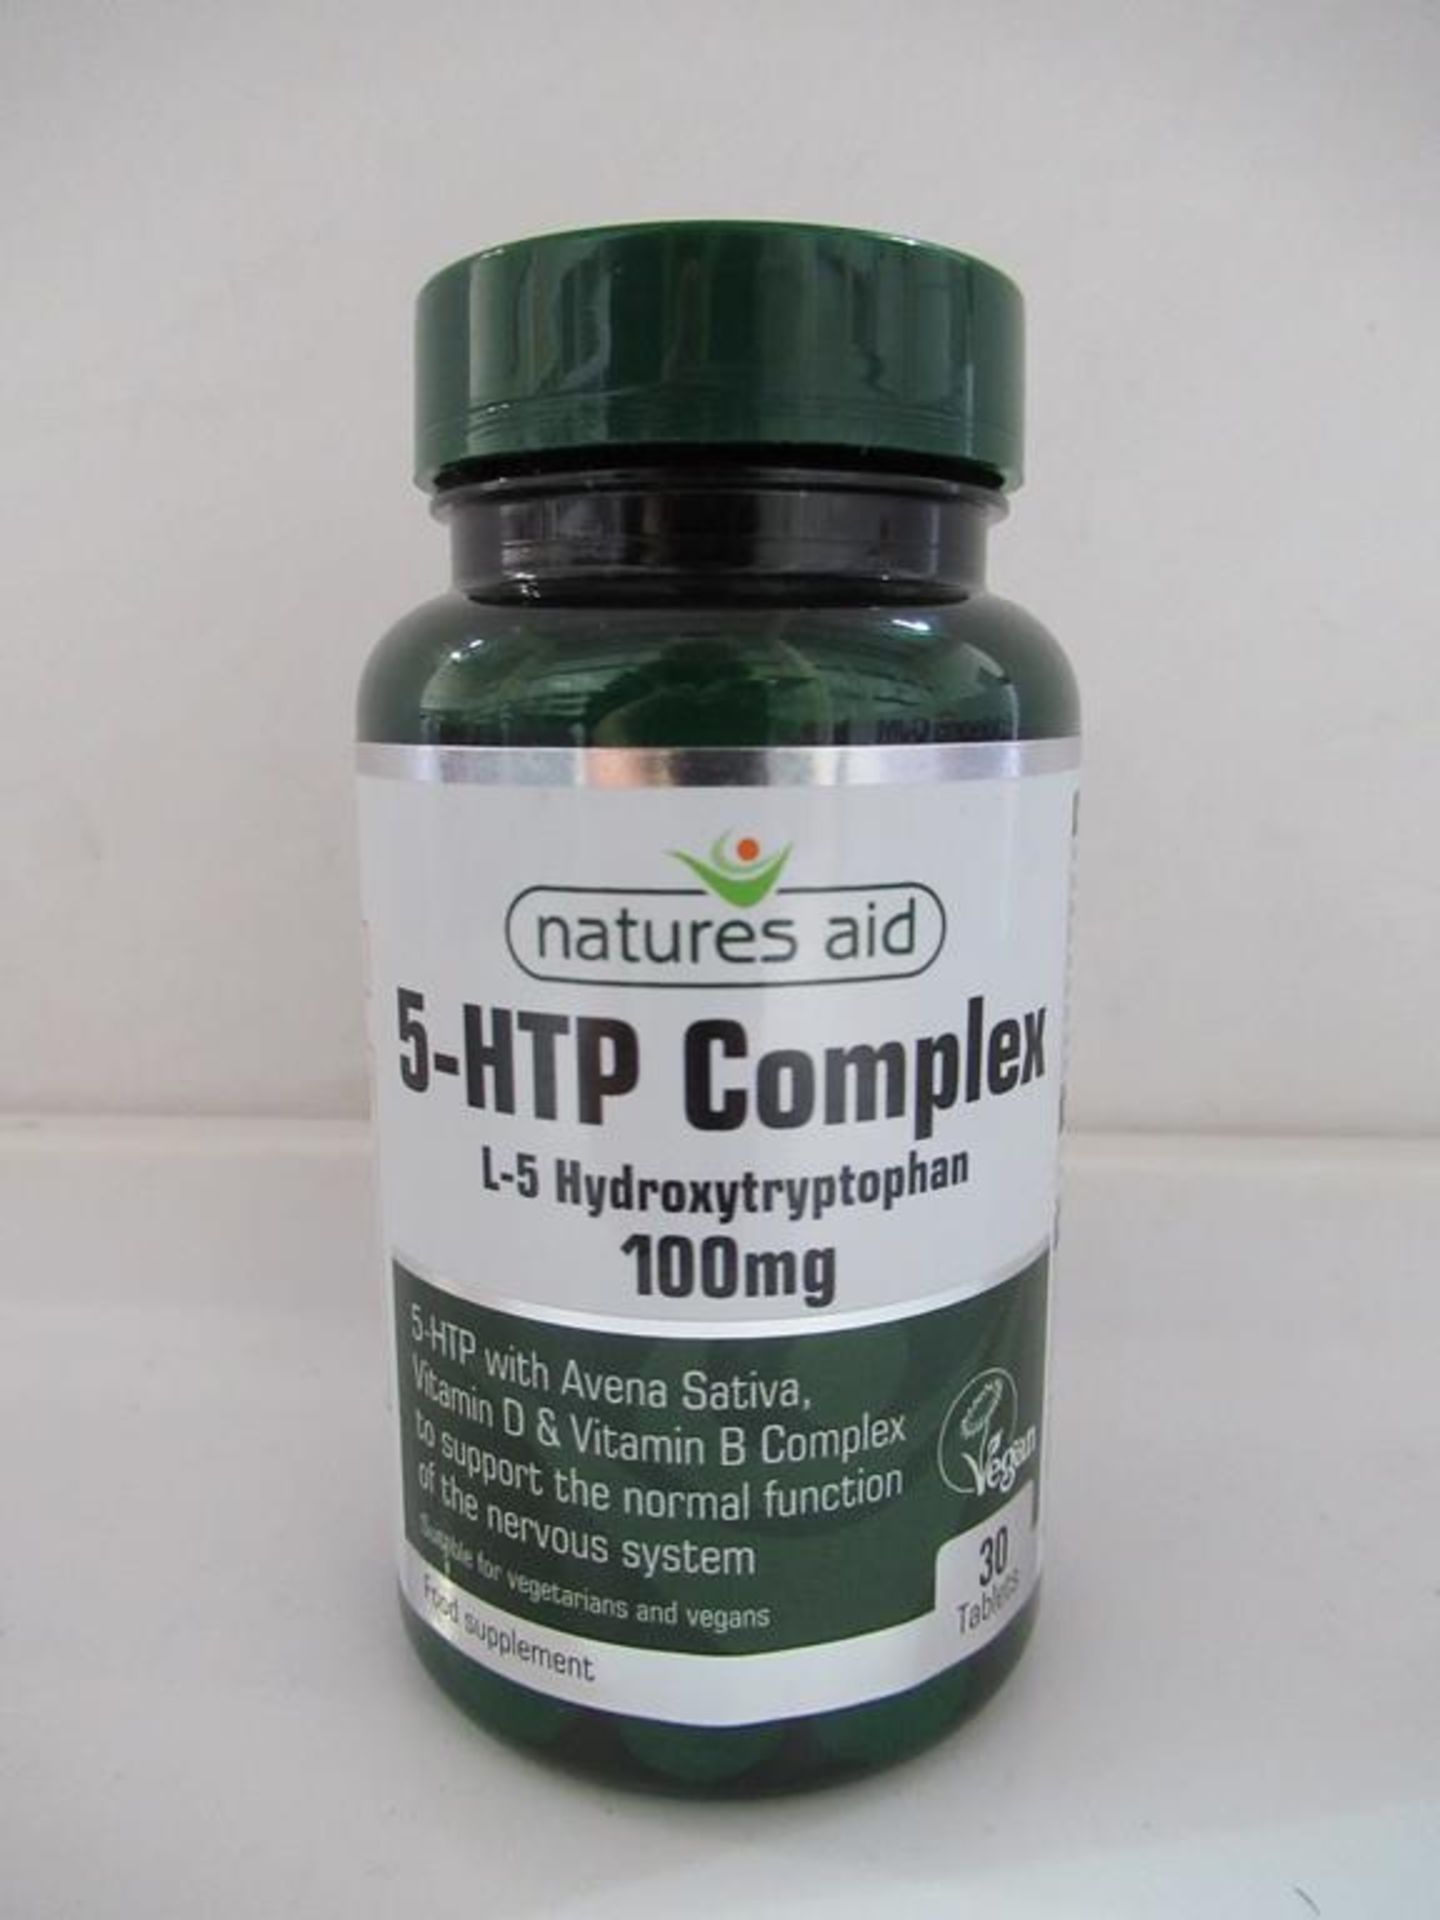 16 x Natures Aid Supplements - Image 6 of 6